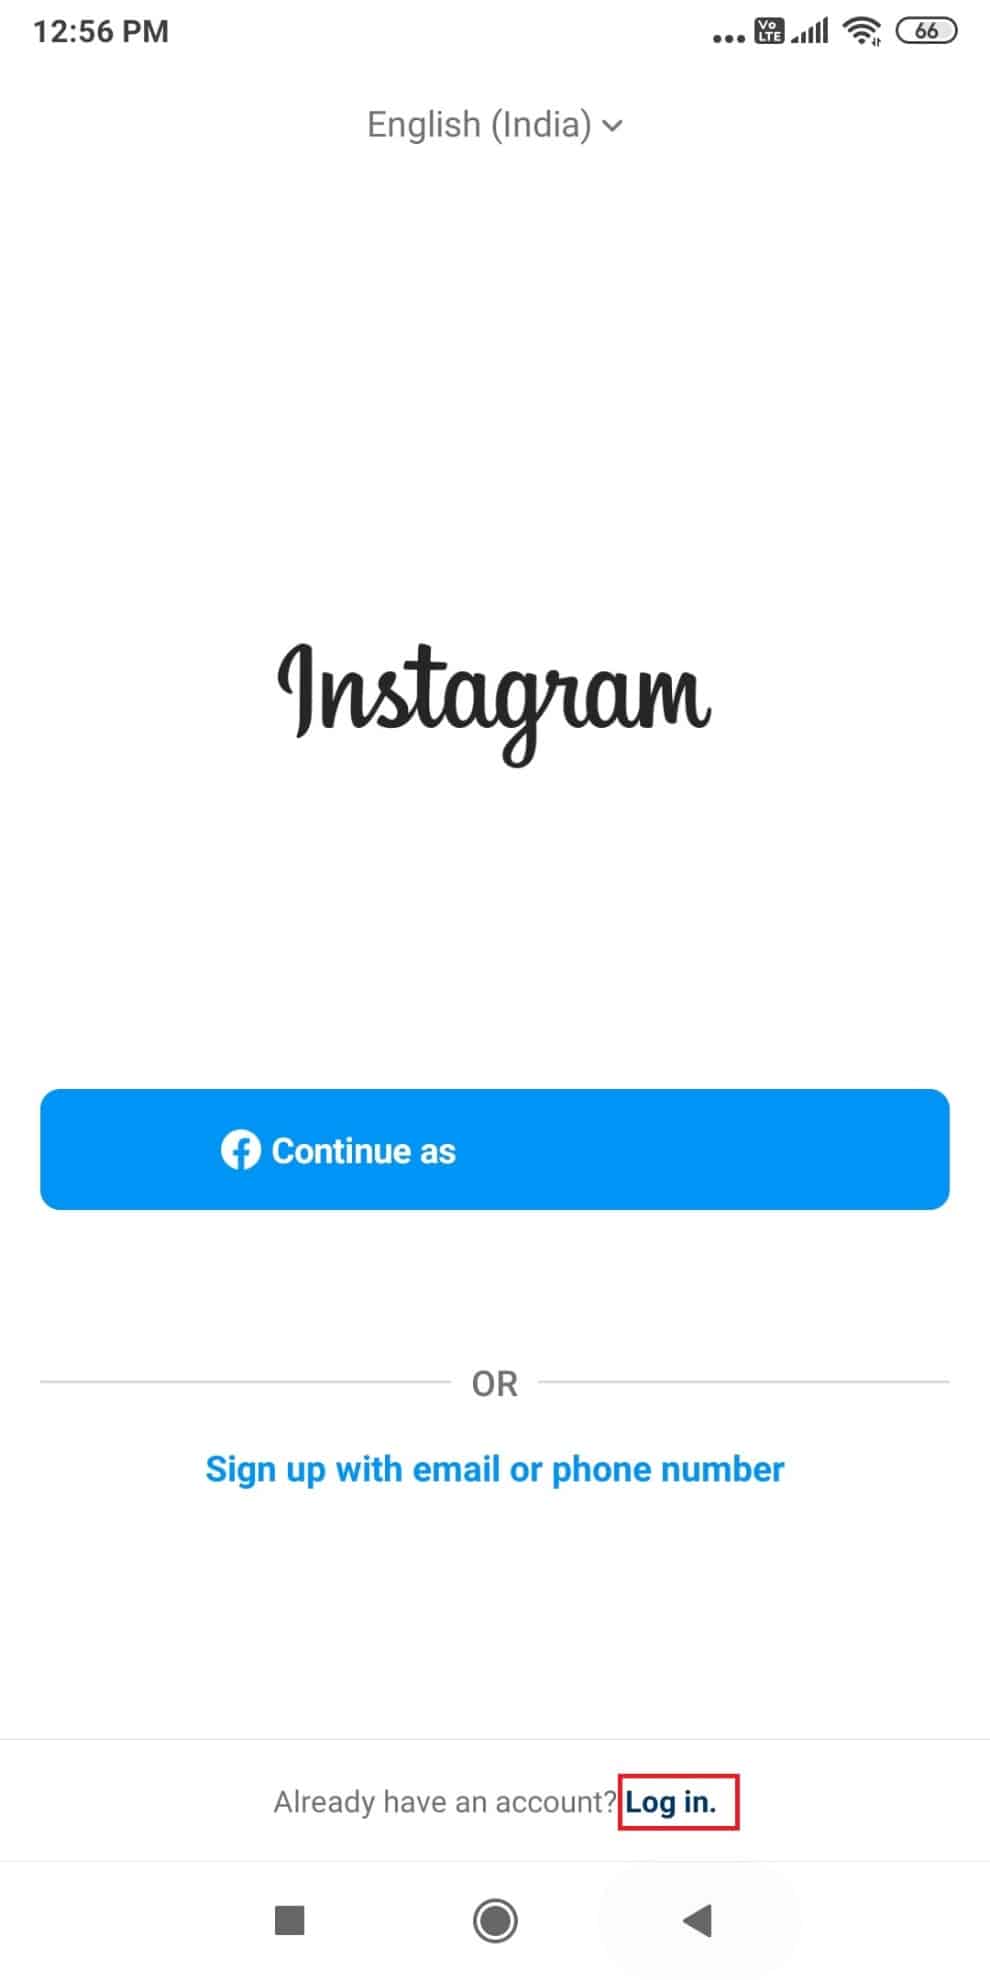 Open the Instagram app on your device and tap on Log in